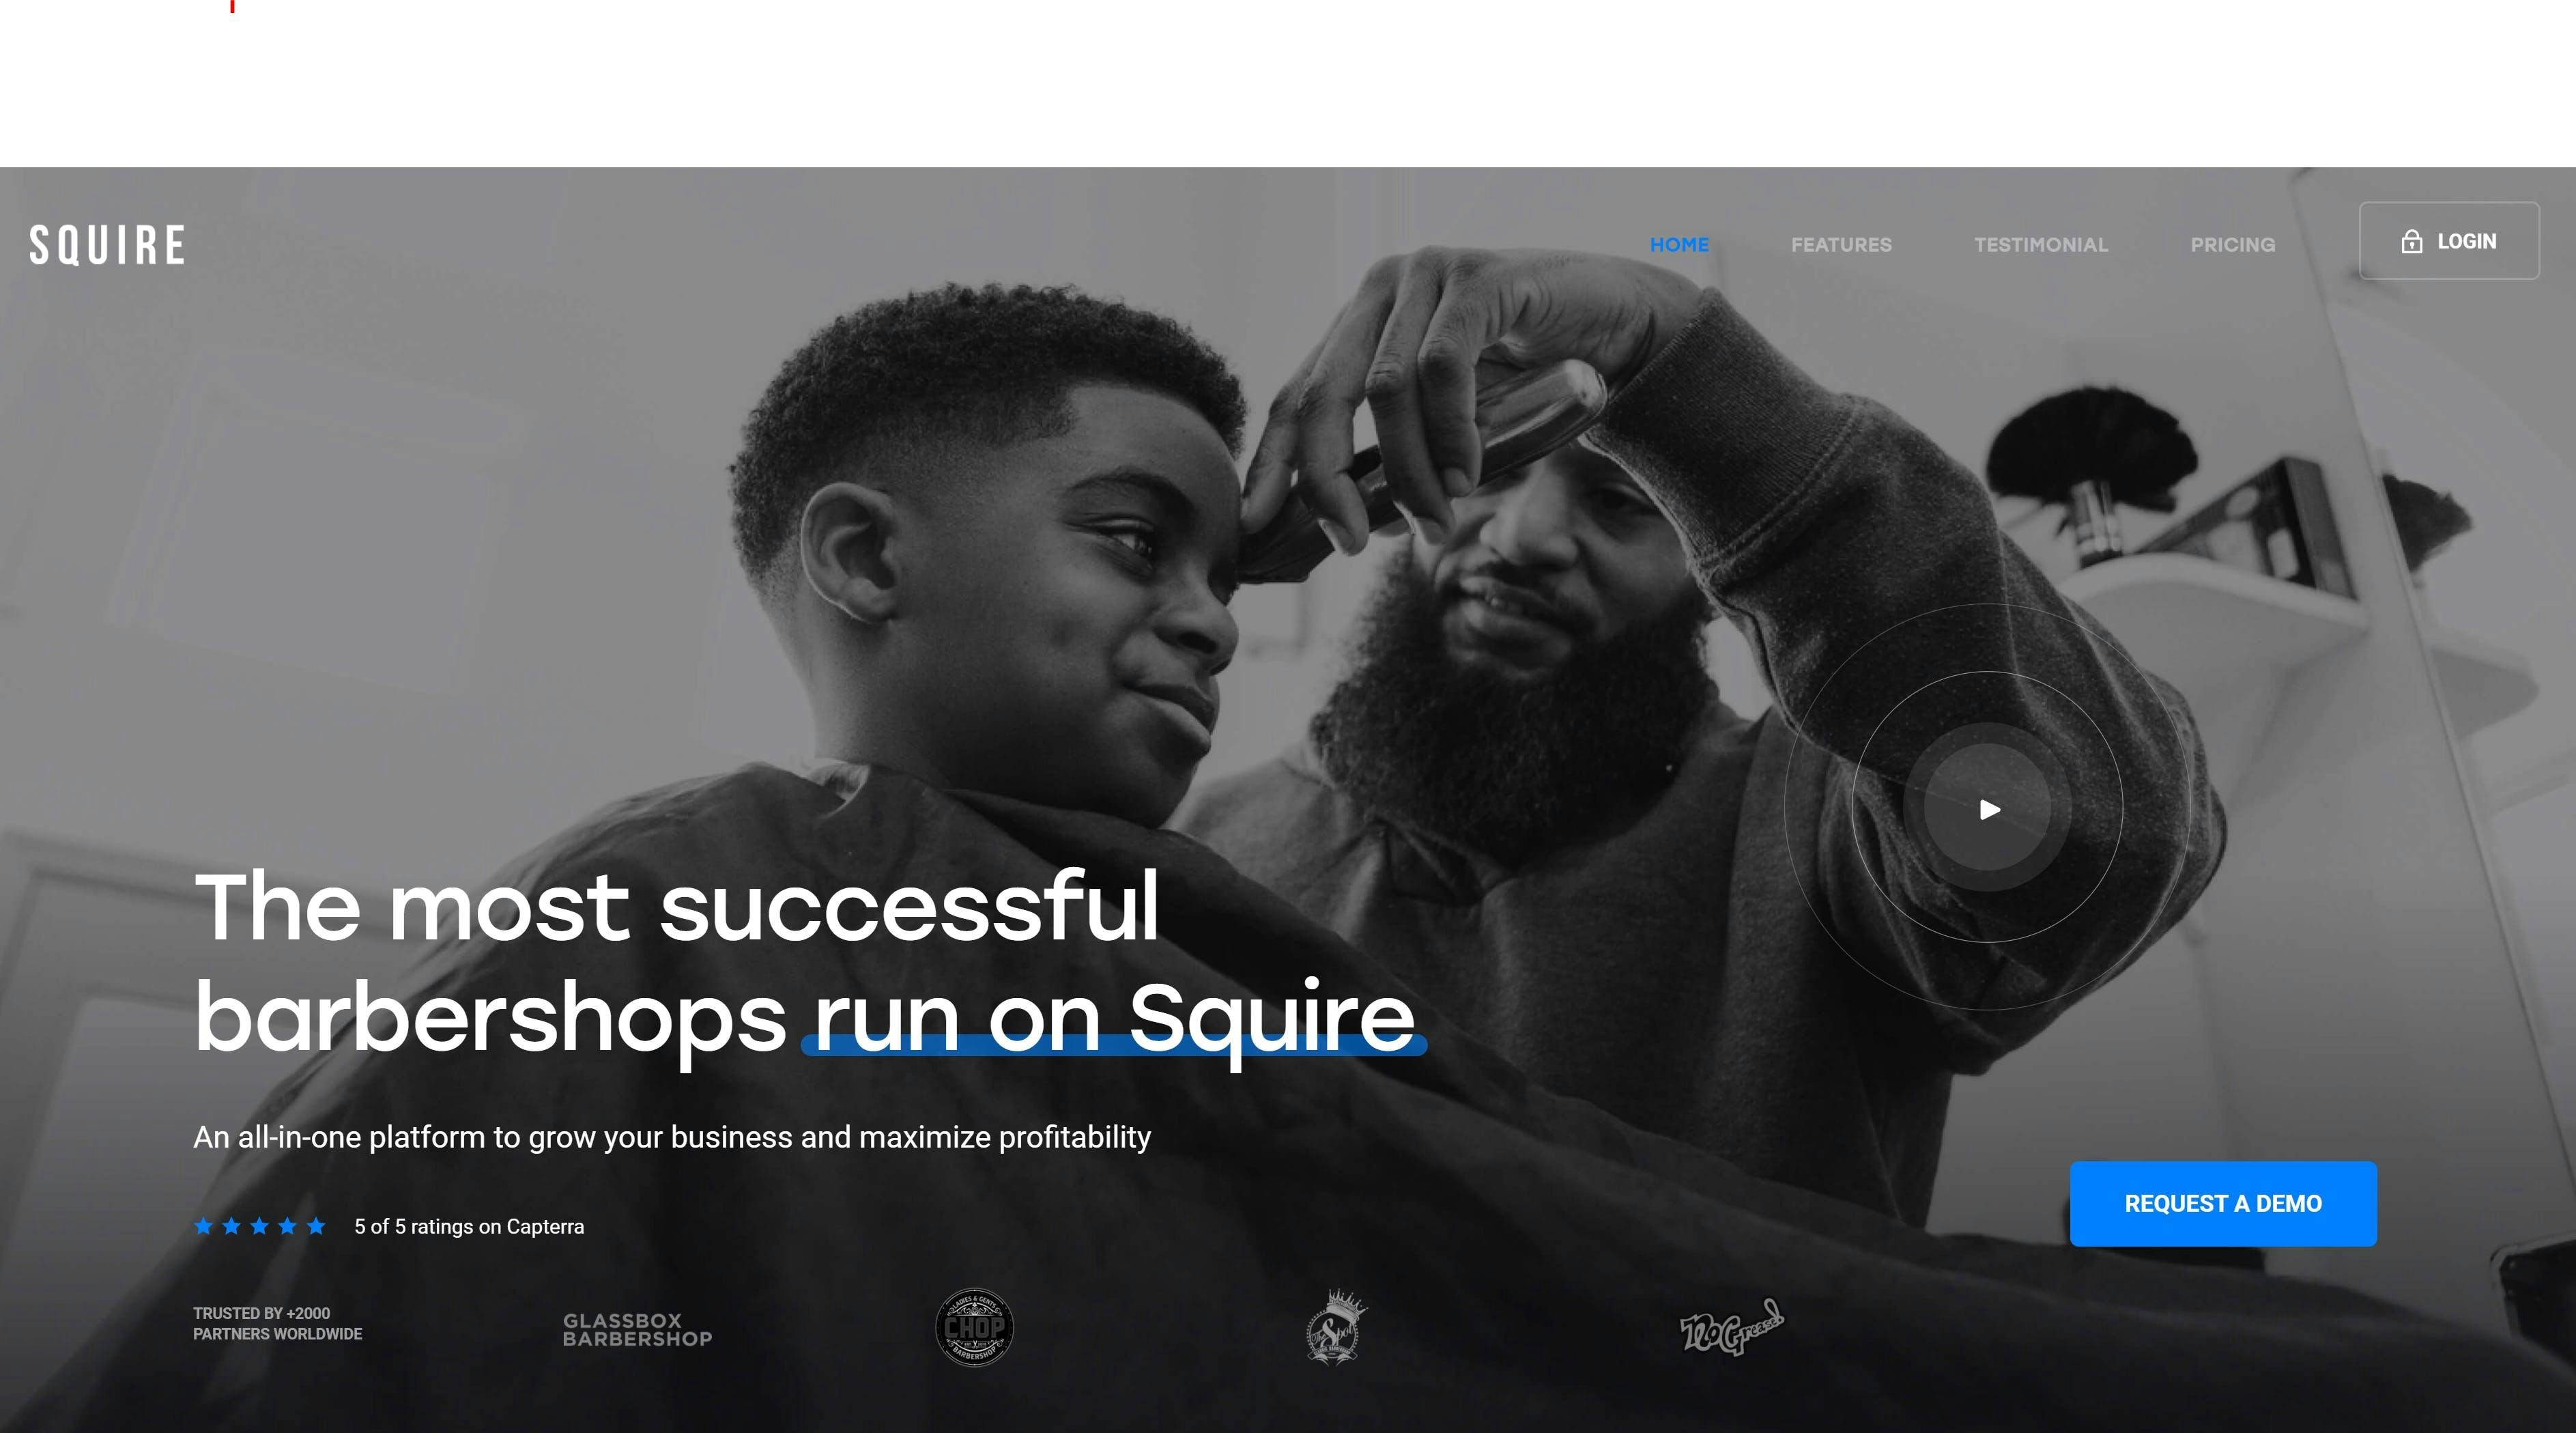 A screenshot from Squire's homepage